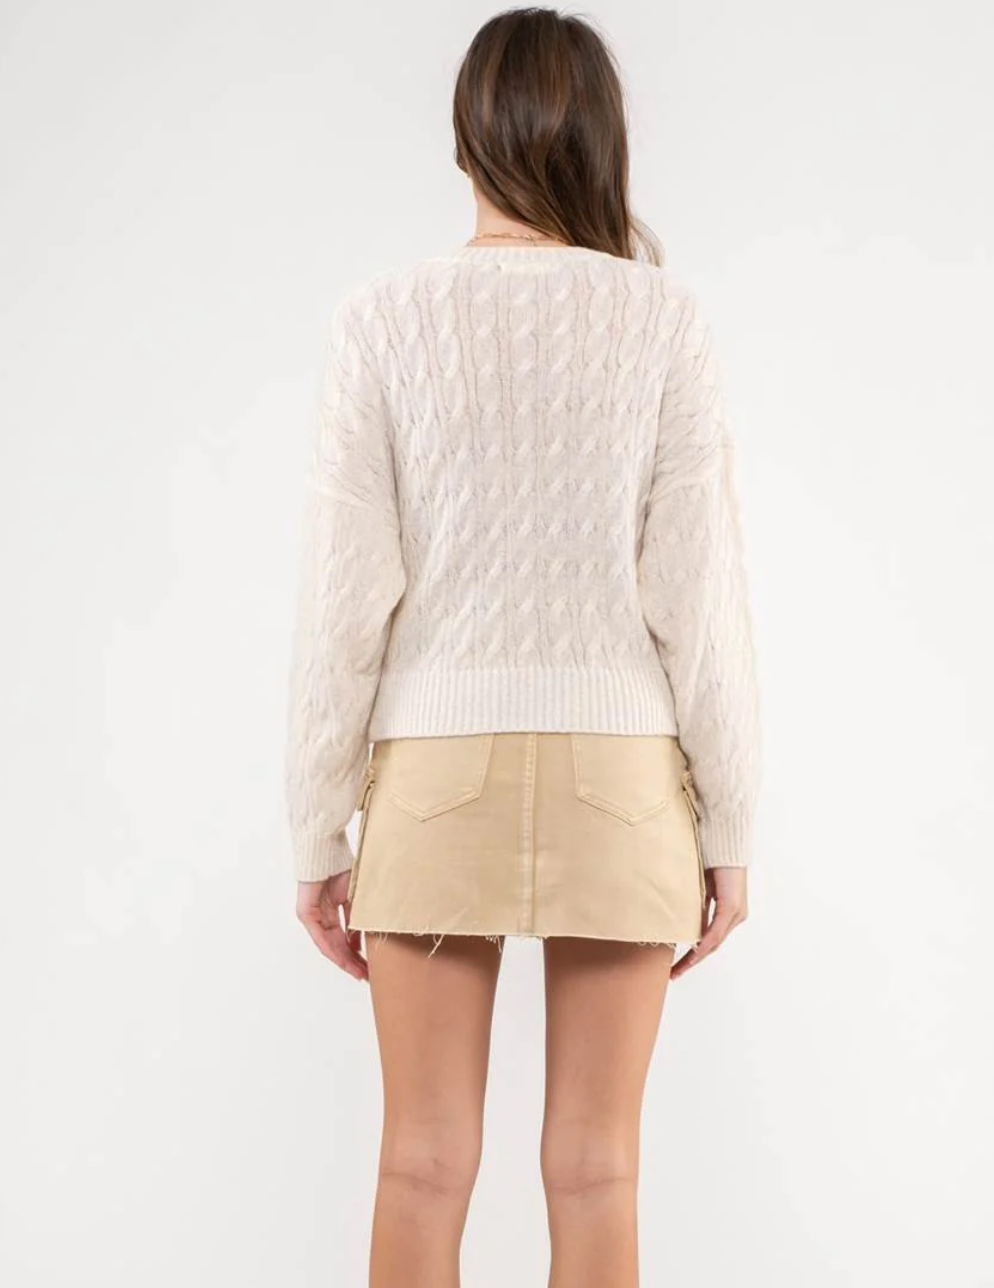 Ivory Crew Neck Cable Knit Sweater (S-L)